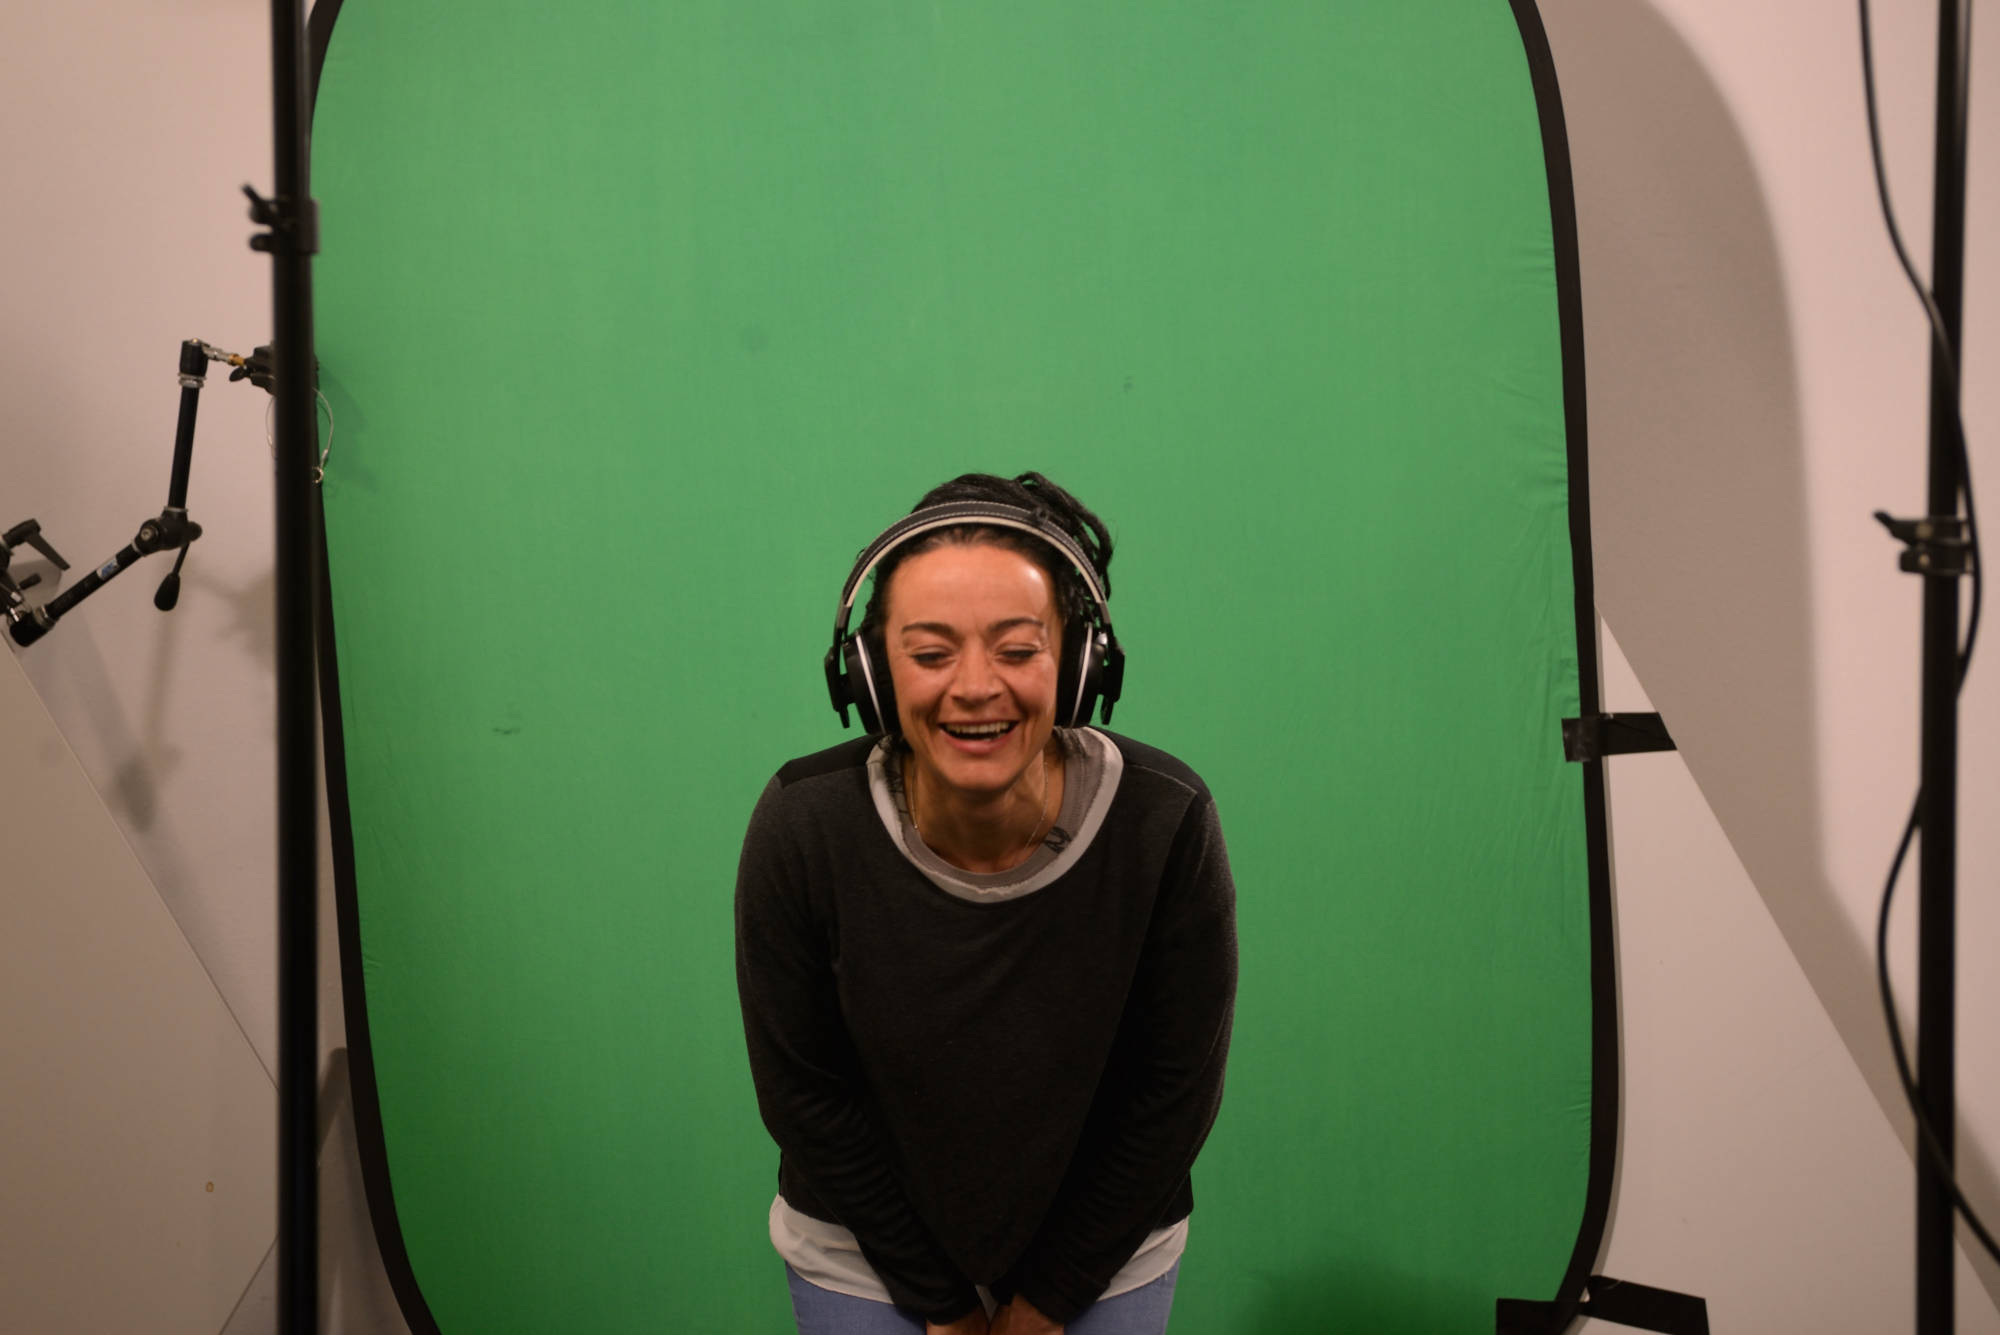 Producer Monica Lombardi and executive producer in San Francisco try out the green screen